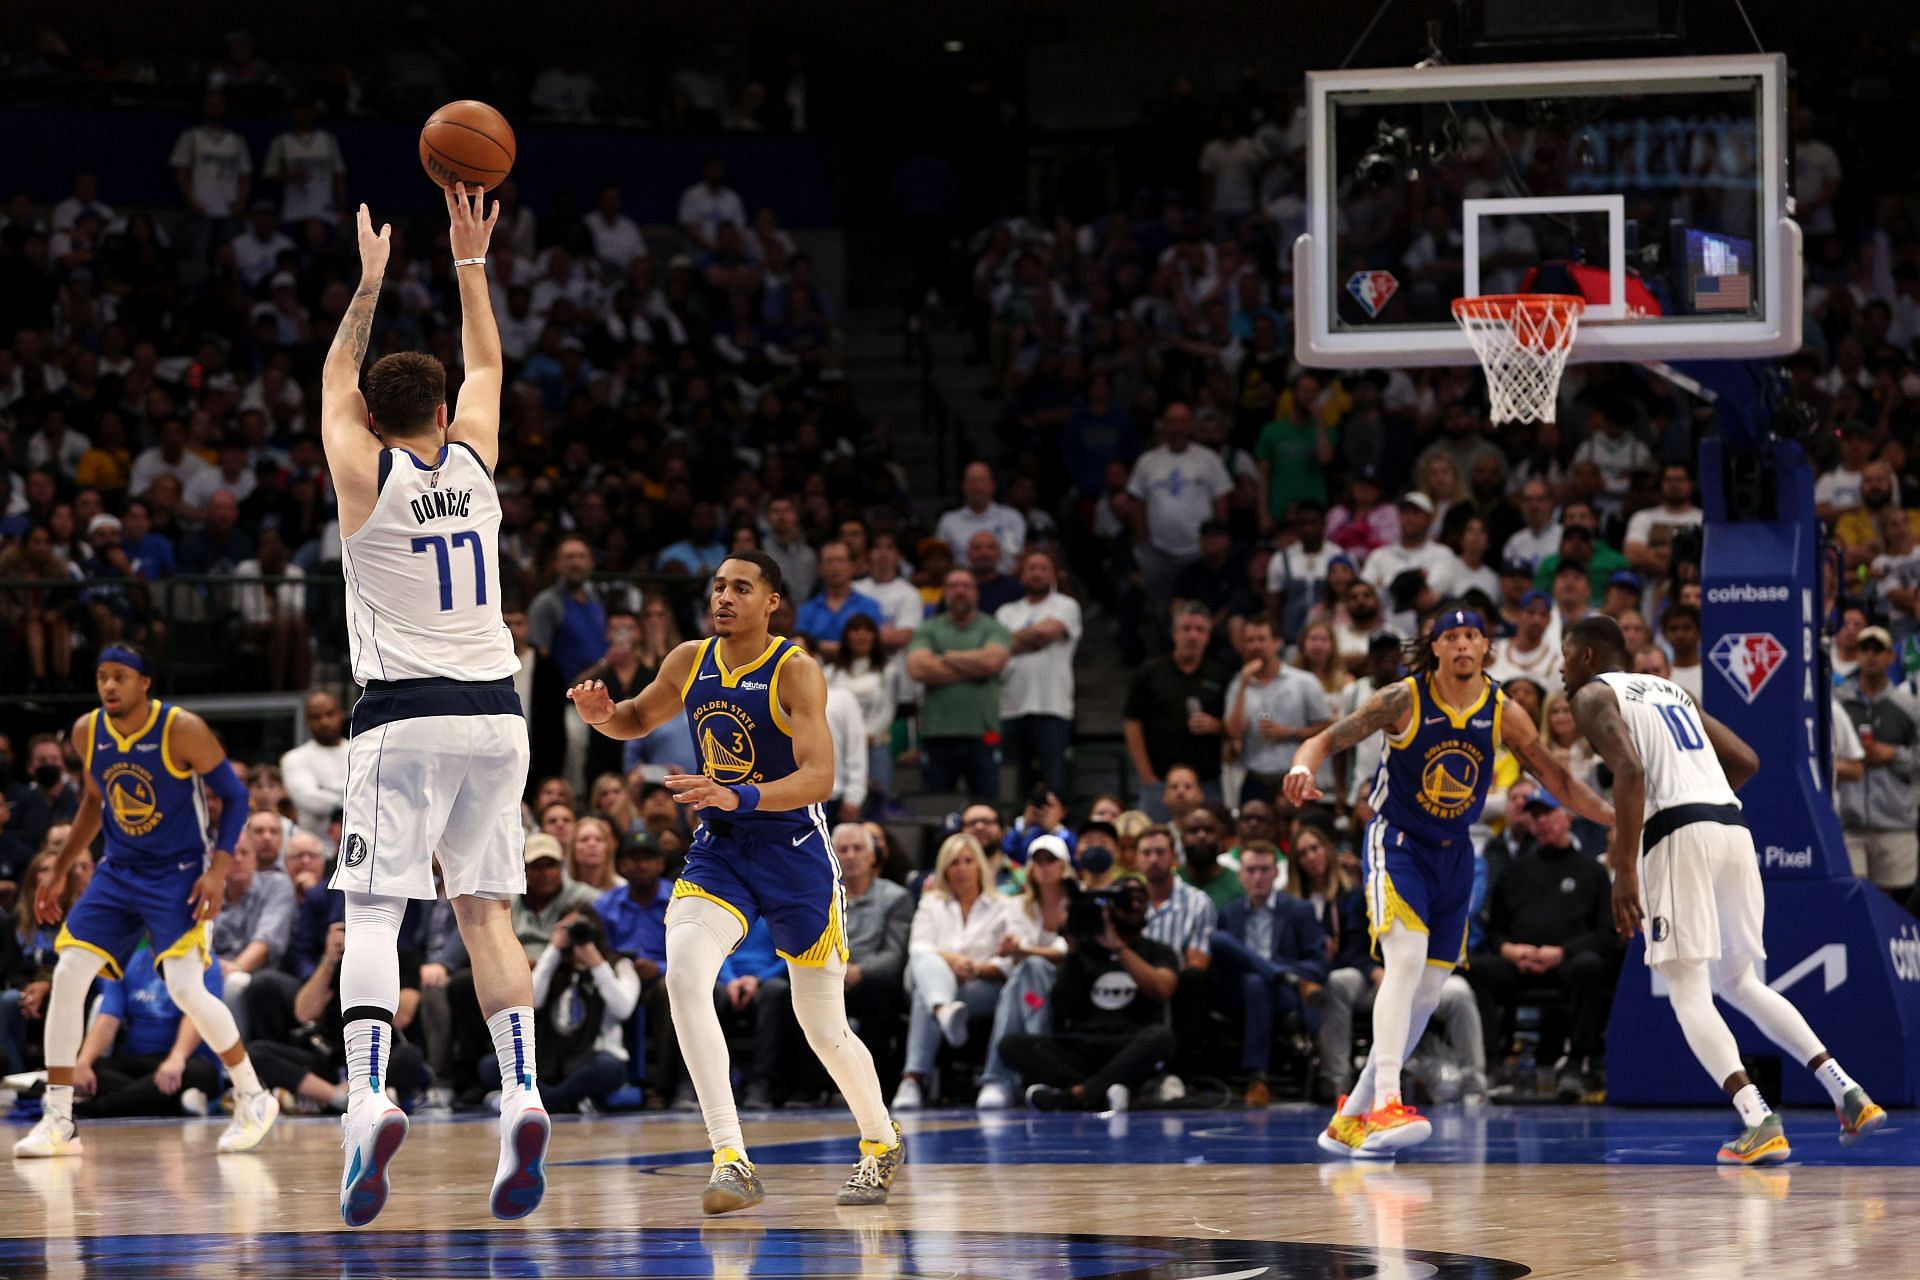 Luka Doncic can make incredible shots, but his playmaking to create open shots for his teammates led to the win in Dallas on Tuesday.